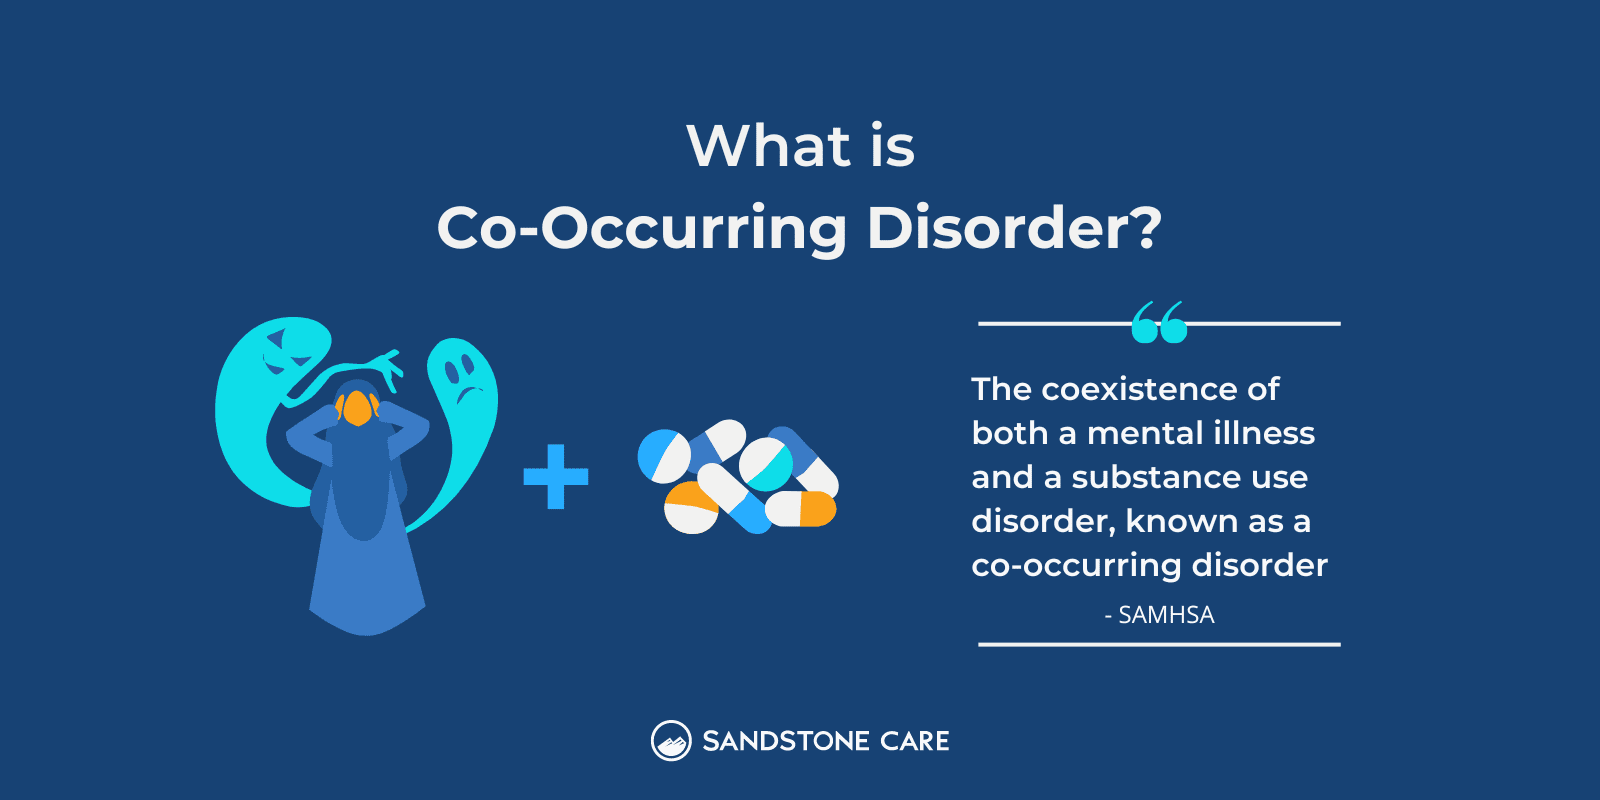 Definition of co-occurring disorder with illustration of a person looking stressed and pills